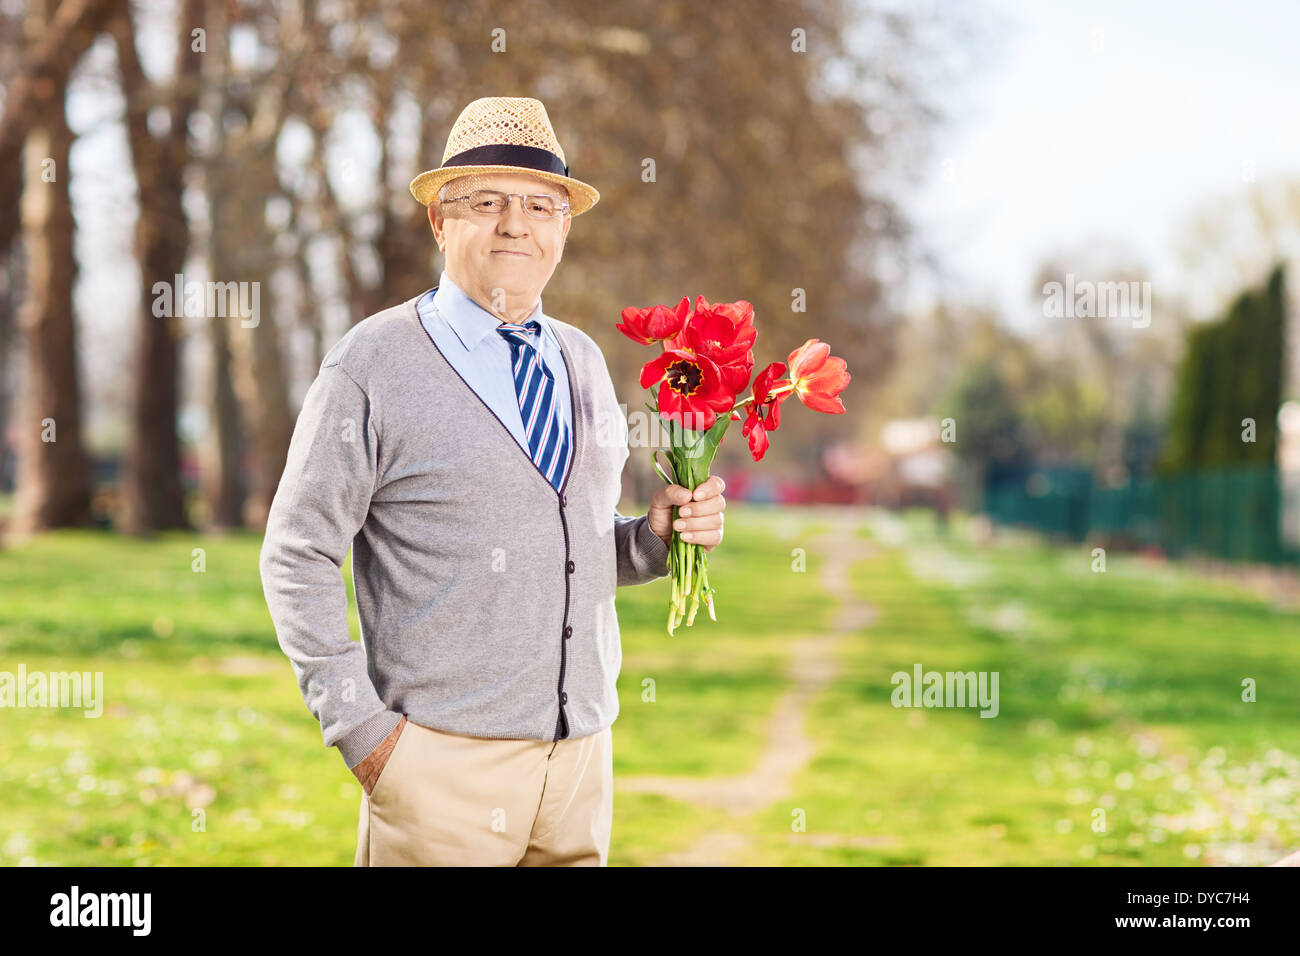 Senior male holding bouquet of red tulips in park Stock Photo